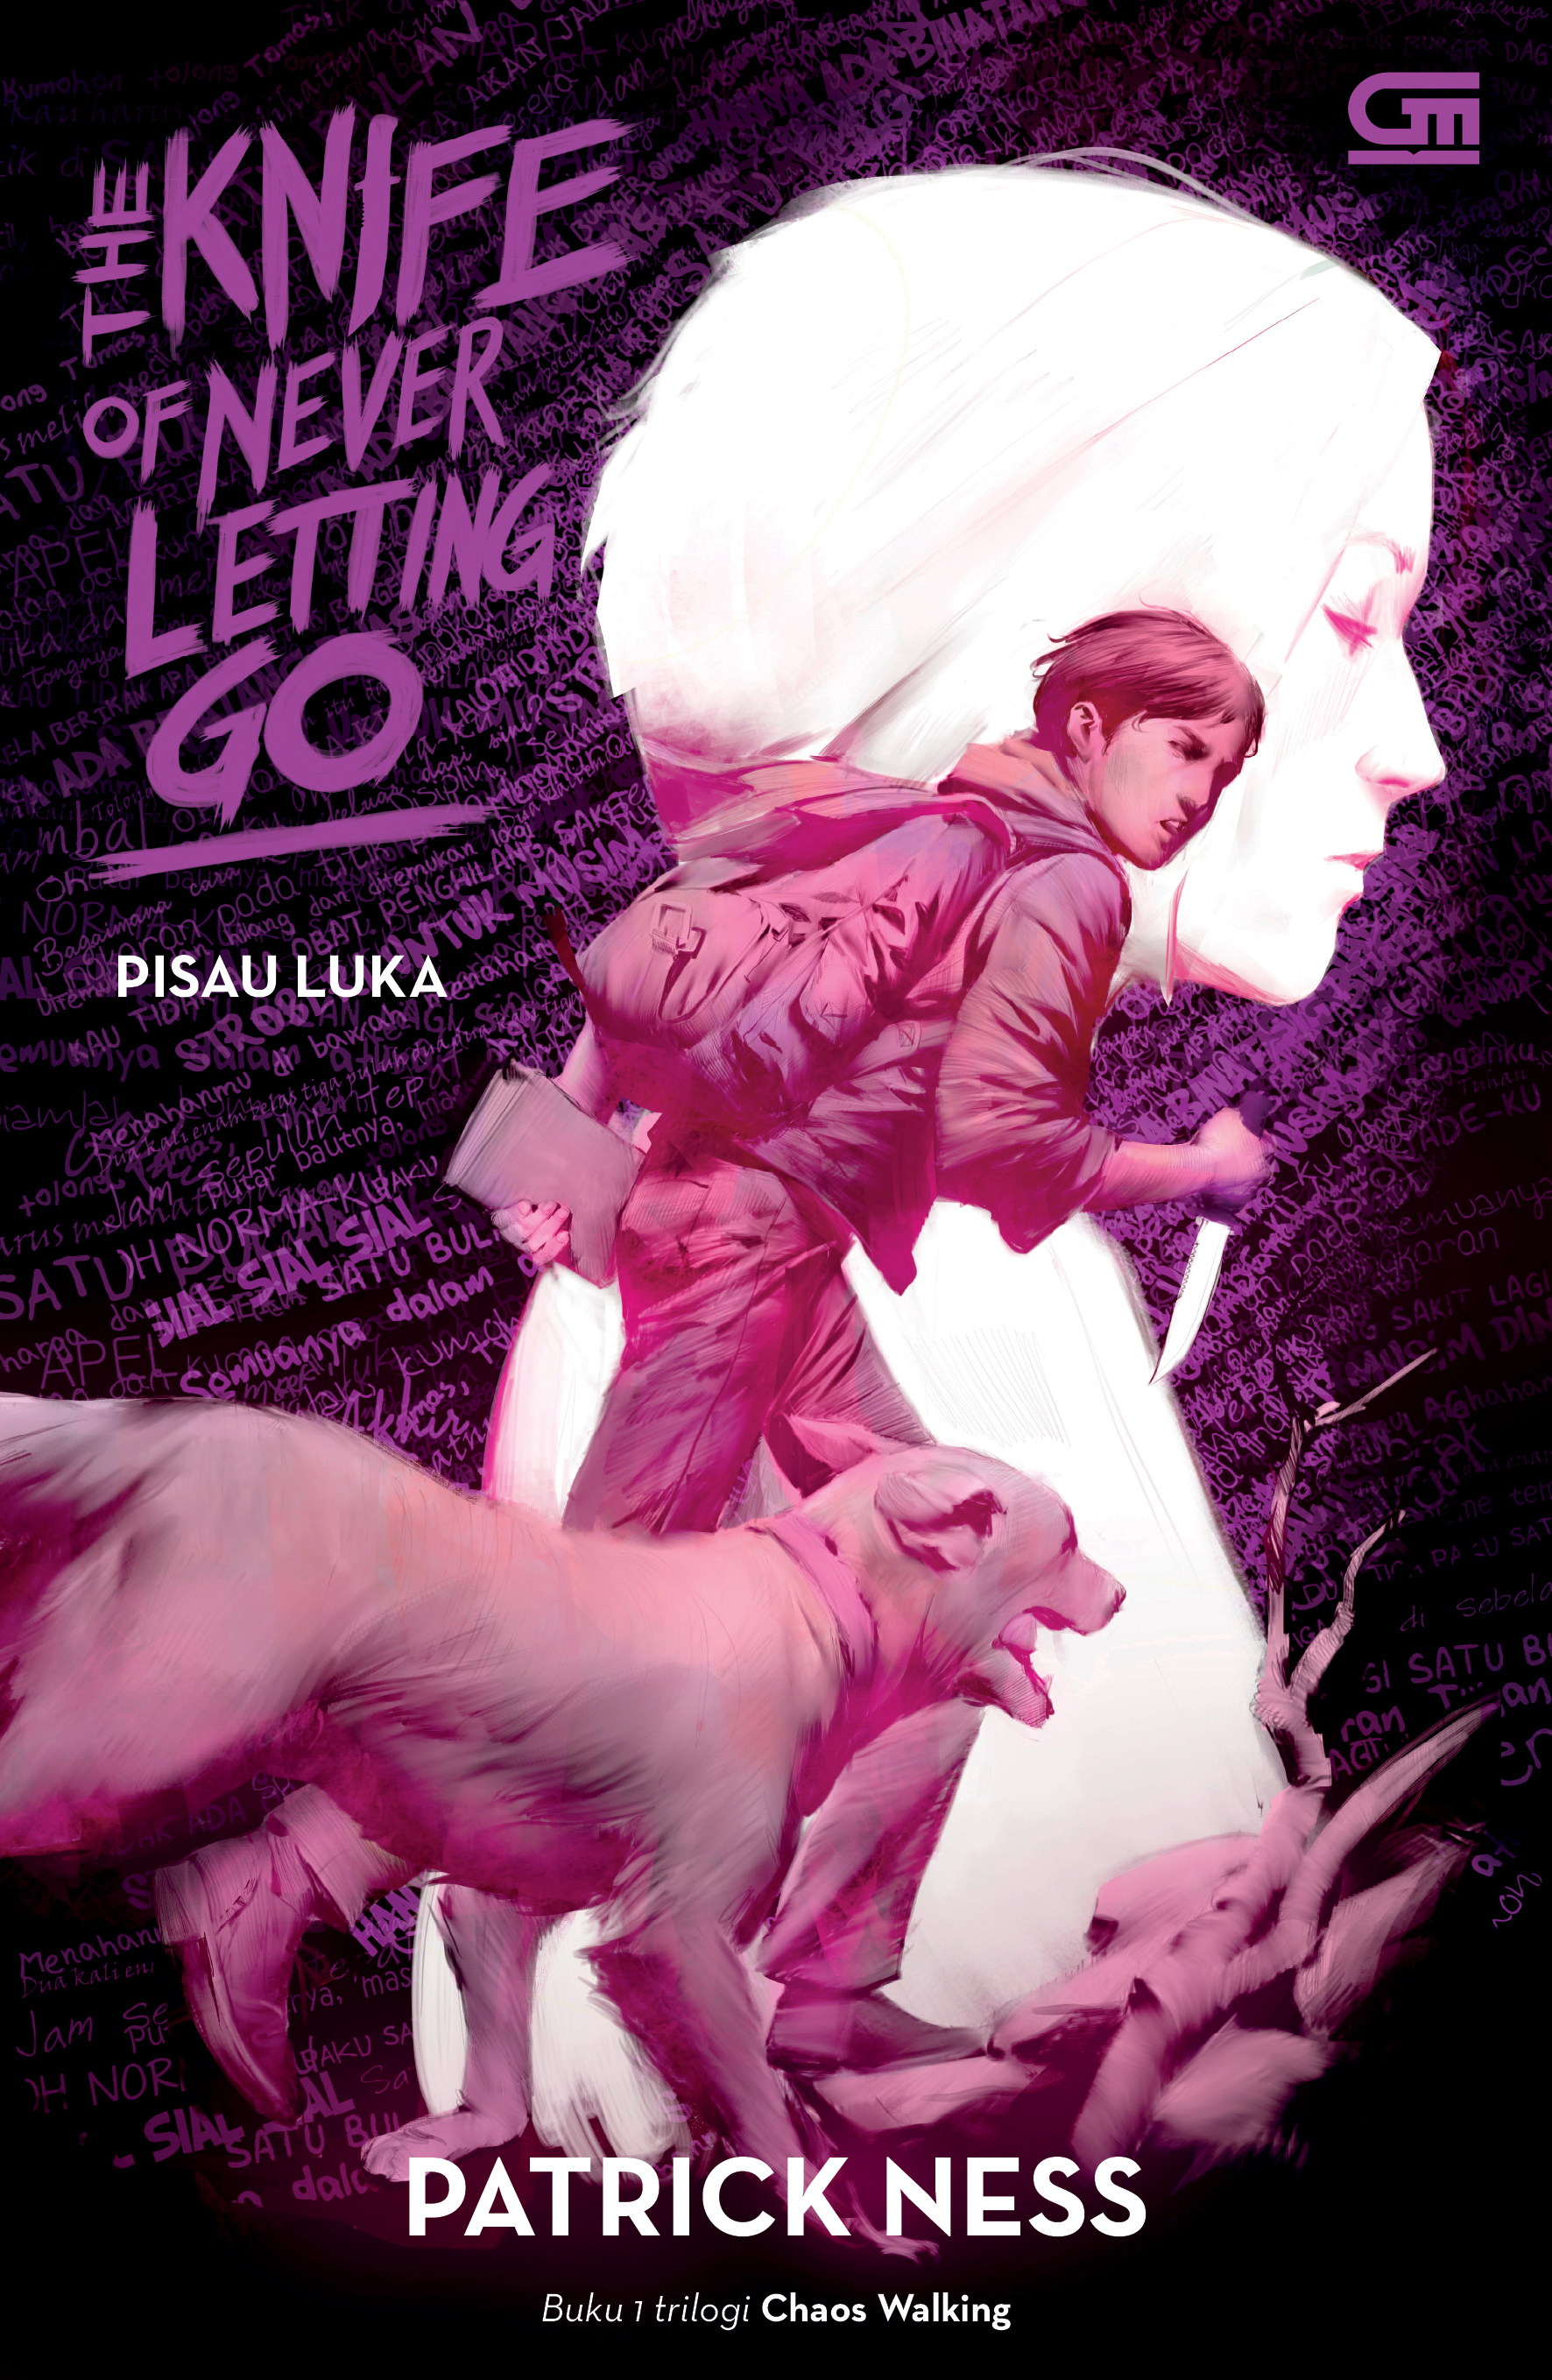 Pisau Luka (The Chaos Walking Trilogy#1: The Knife of Never Letting Go)